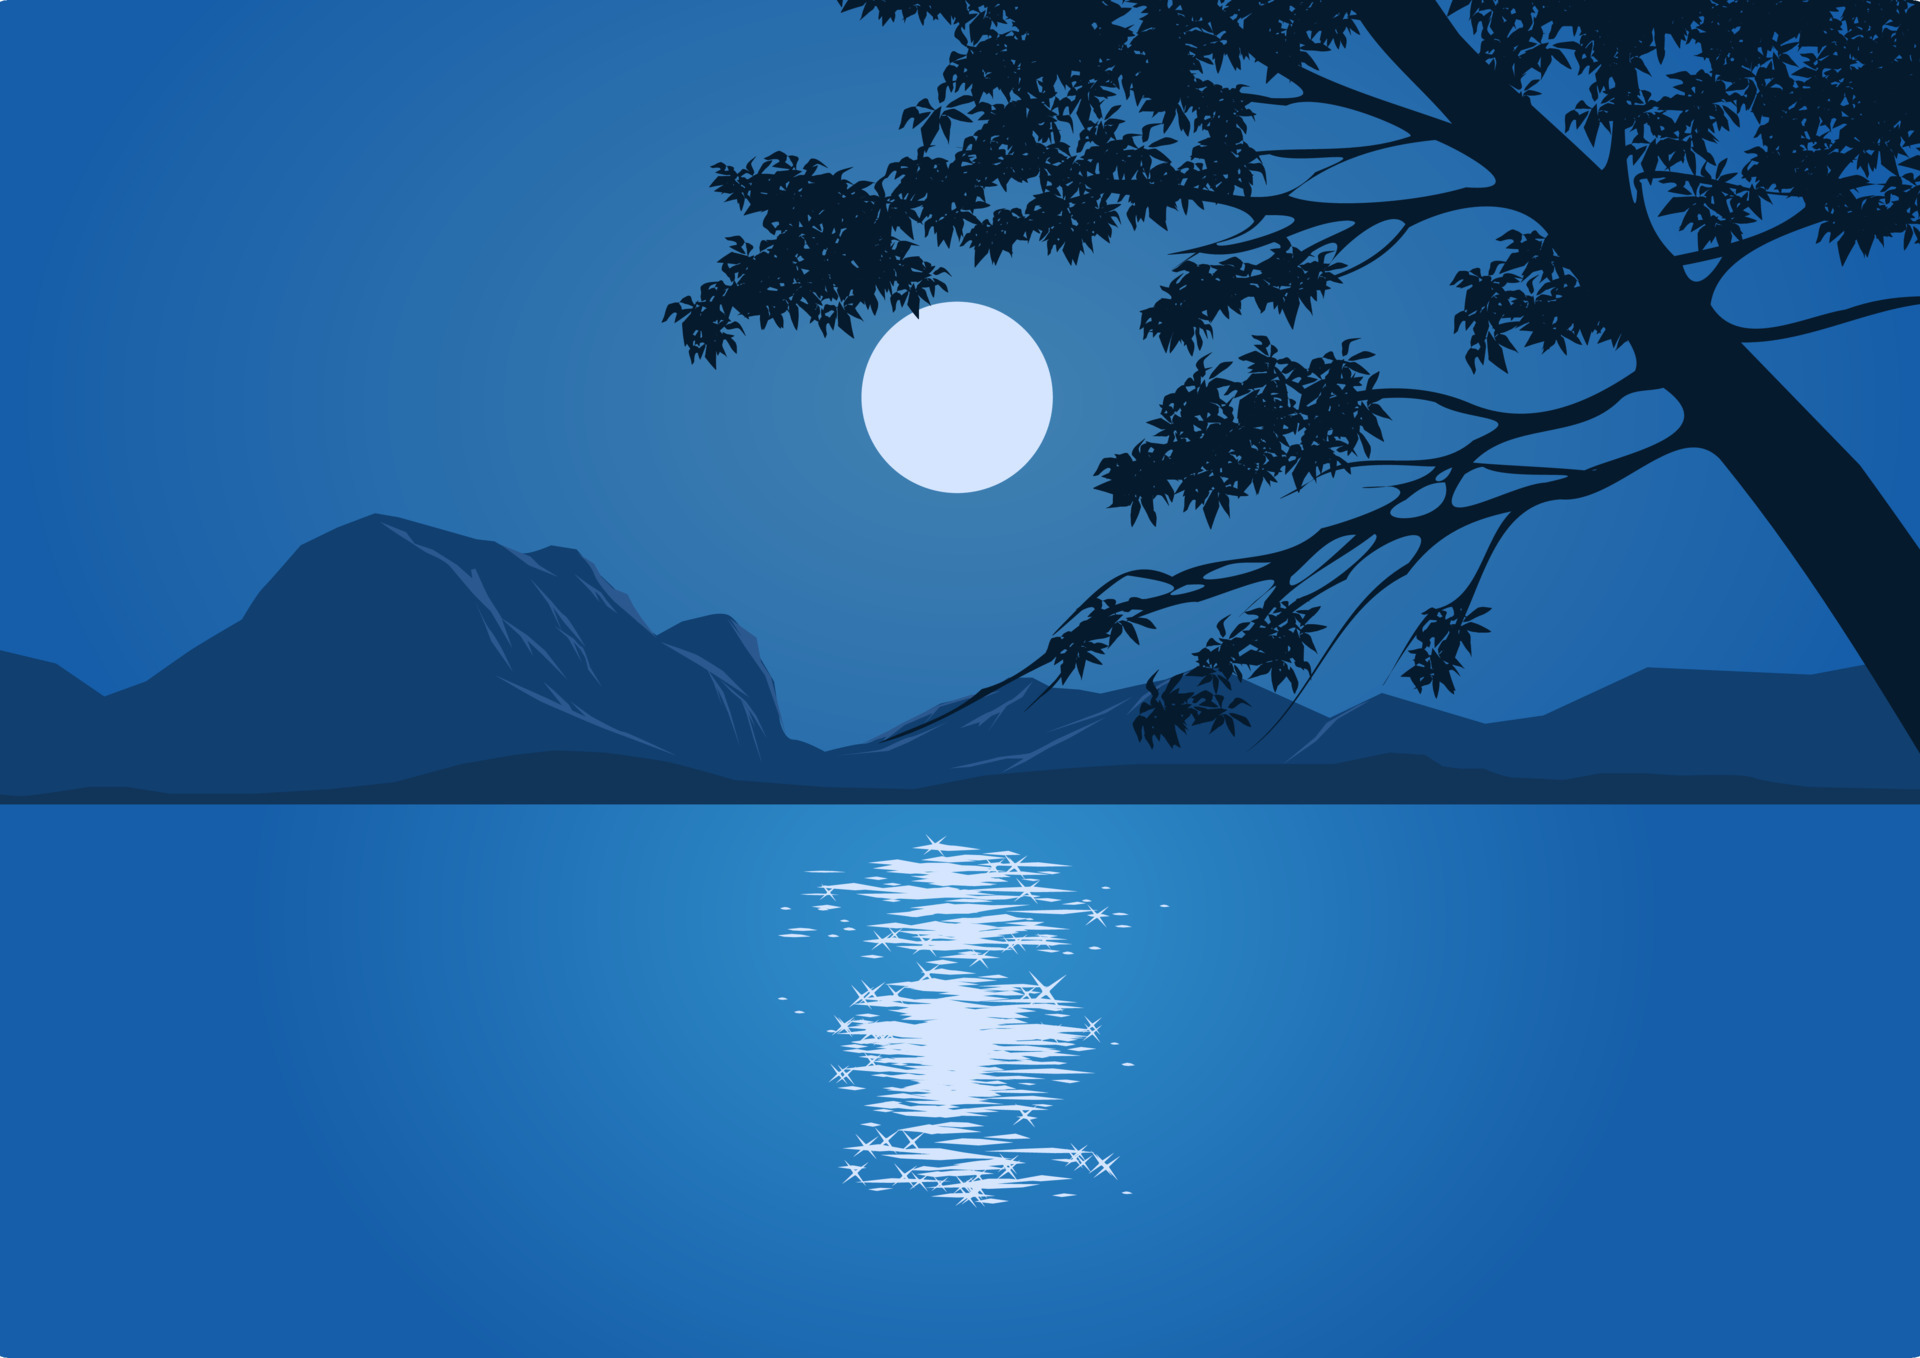 Beautiful tranquil night illustration with full moon over lake and ...